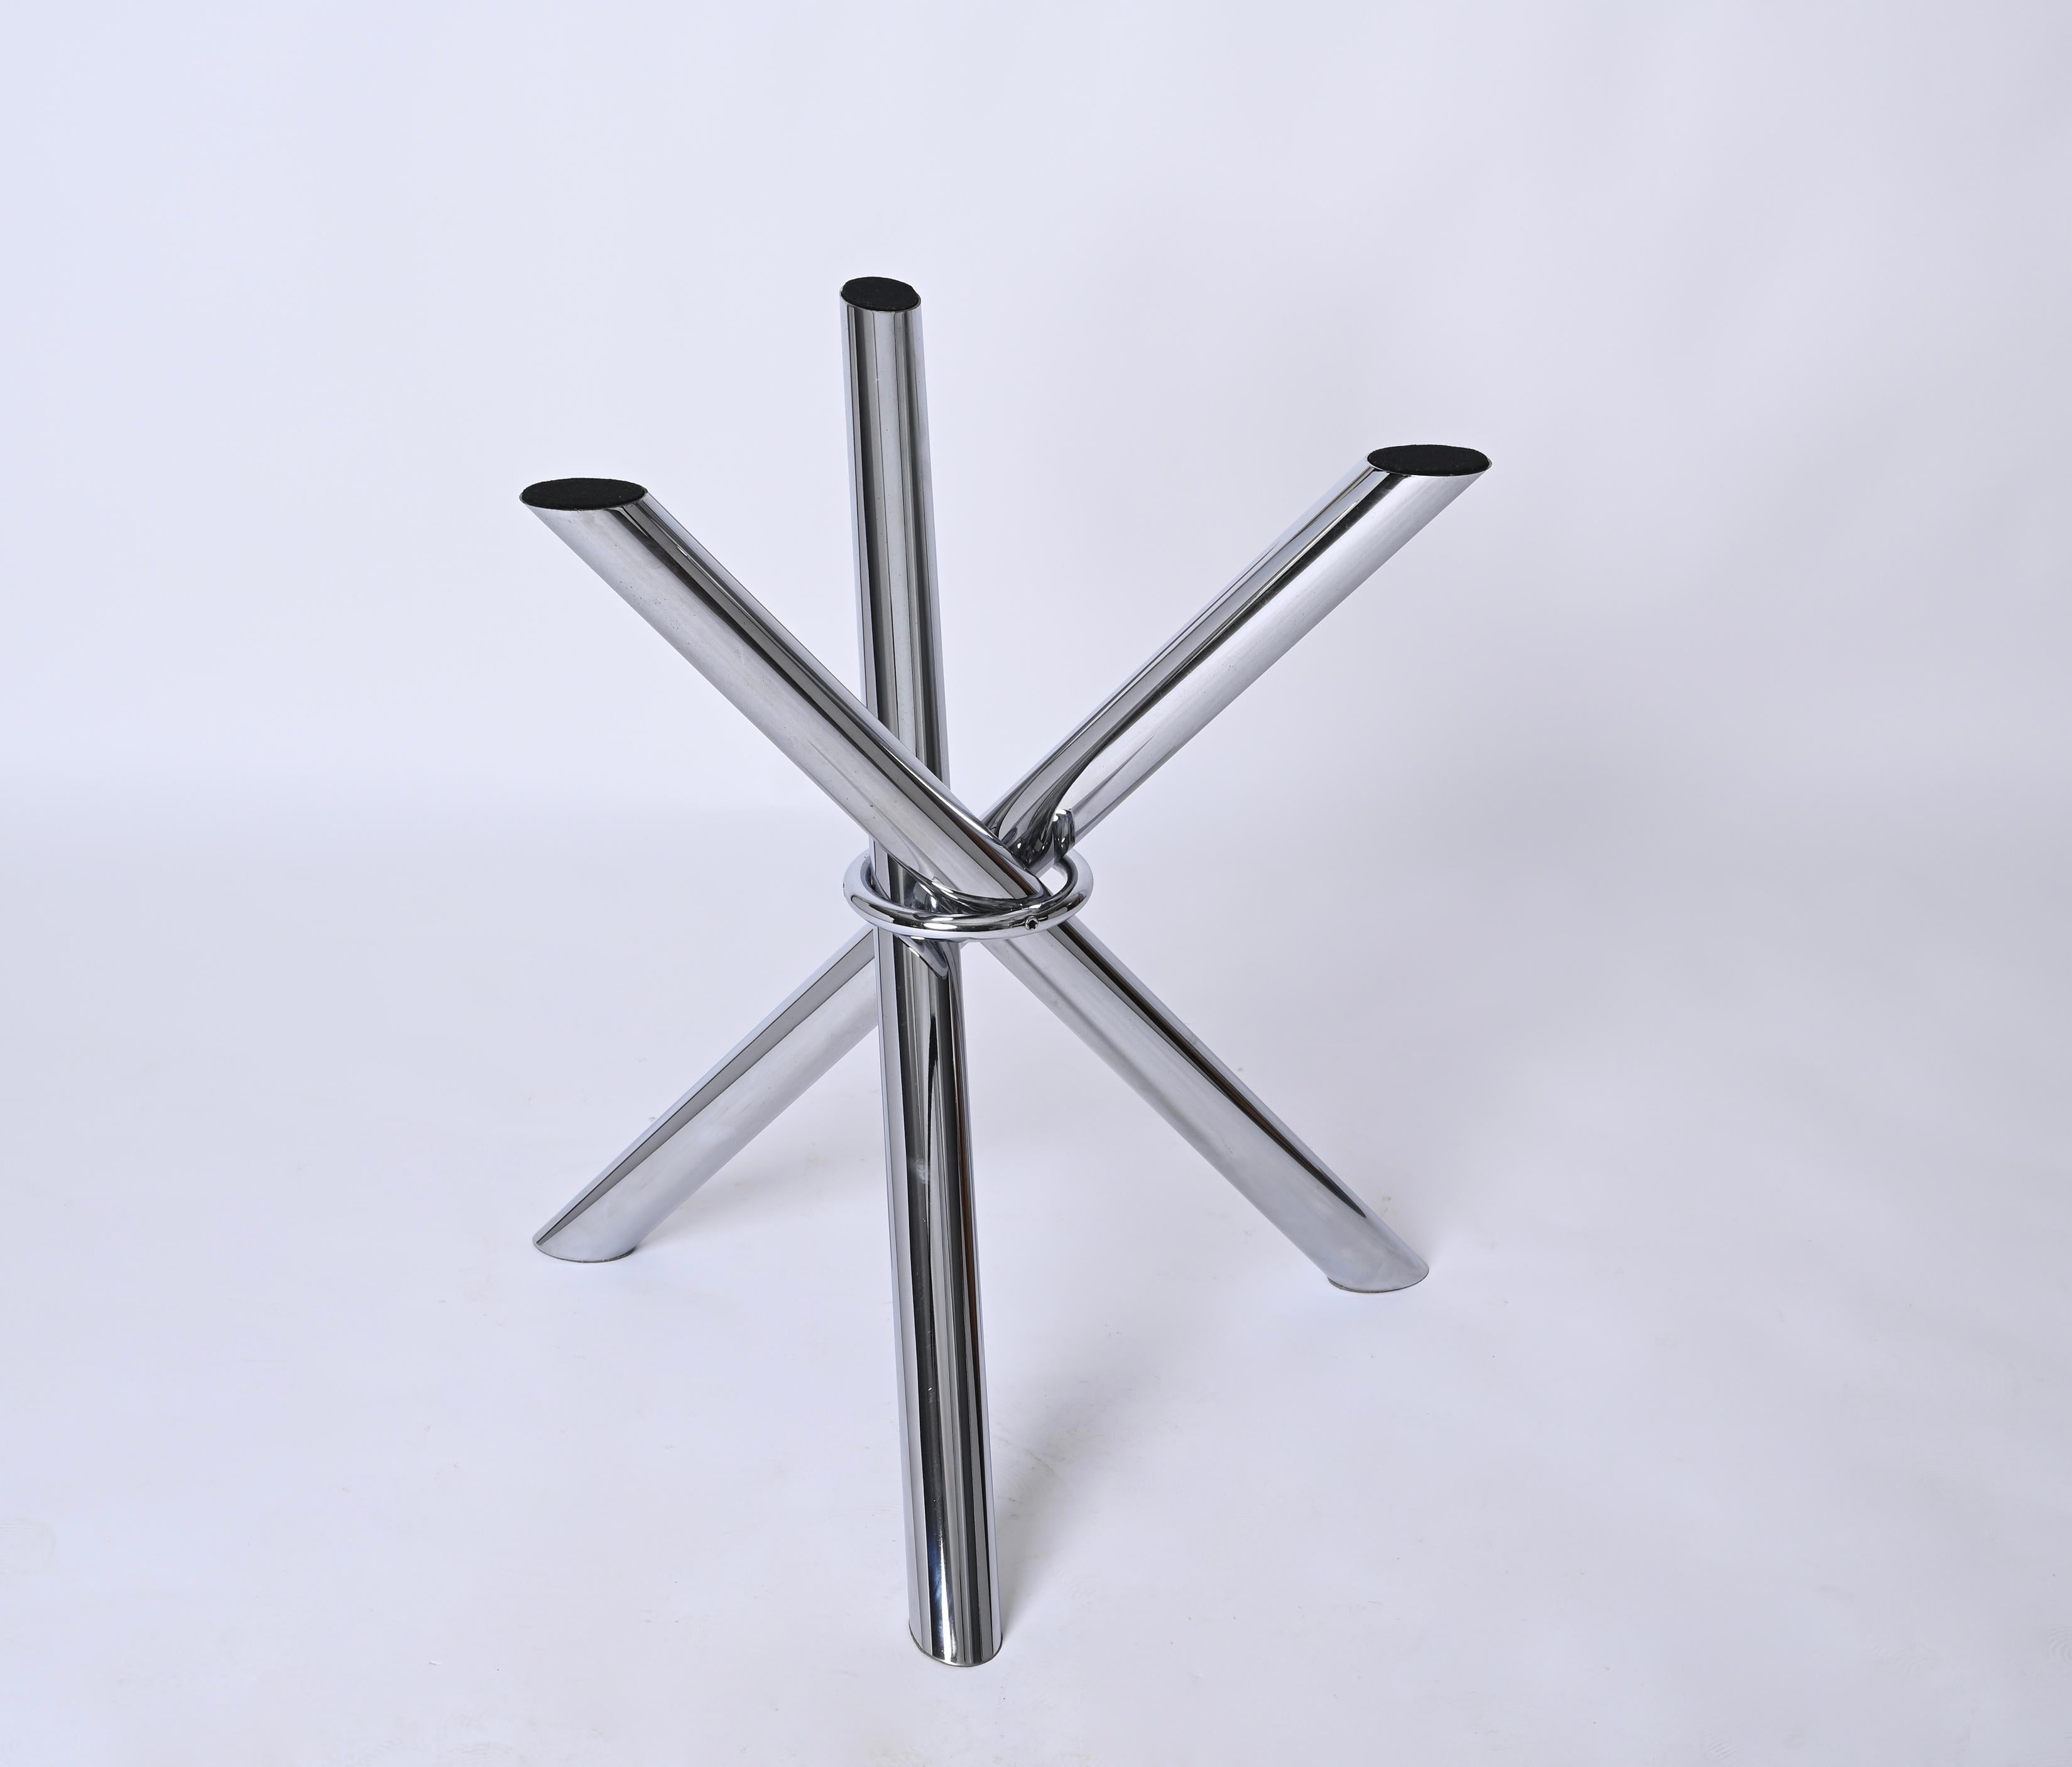 Late 20th Century Mid-Century Dining Table, Chromed Stainless Steel with Smoked Glass, Italy 1970s For Sale